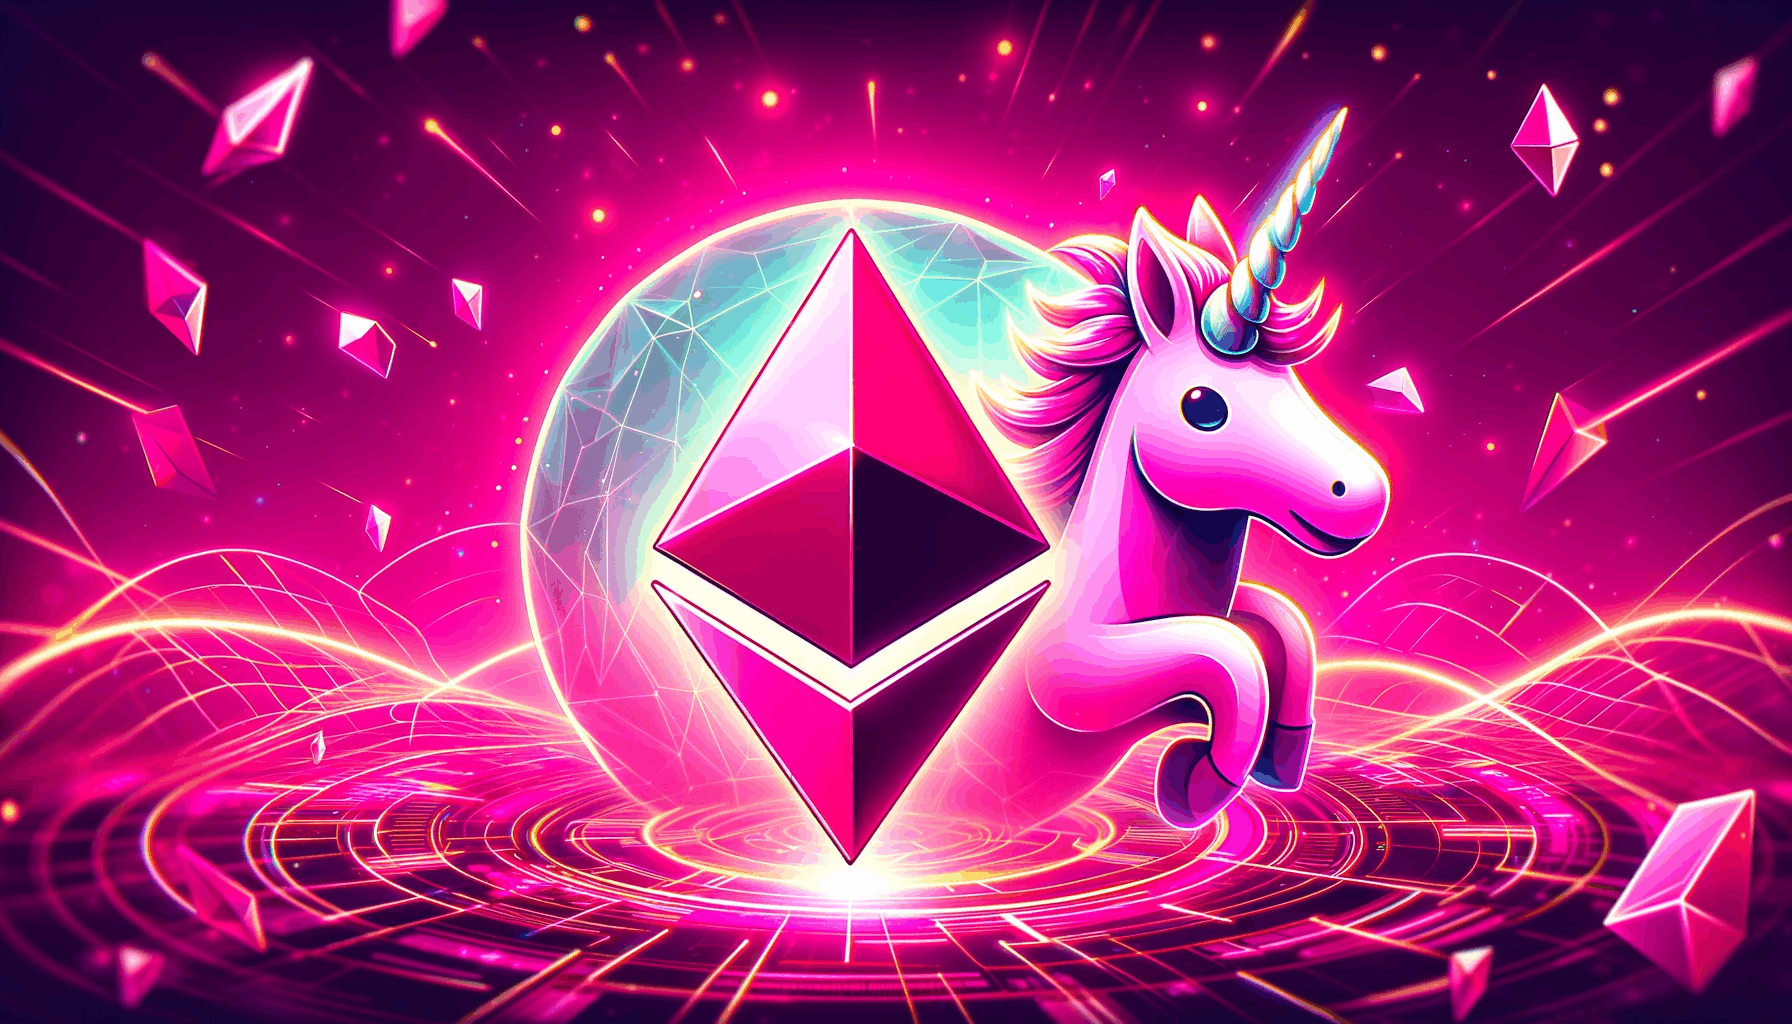 DALL·E-2023-12-28-11.57.11-A-vibrant-pink-toned-banner-image-featuring-the-logos-of-Ethereum-ETH-and-Uniswap.-The-Ethereum-logo-should-be-creatively-adapted-to-fit-the-lively-.png